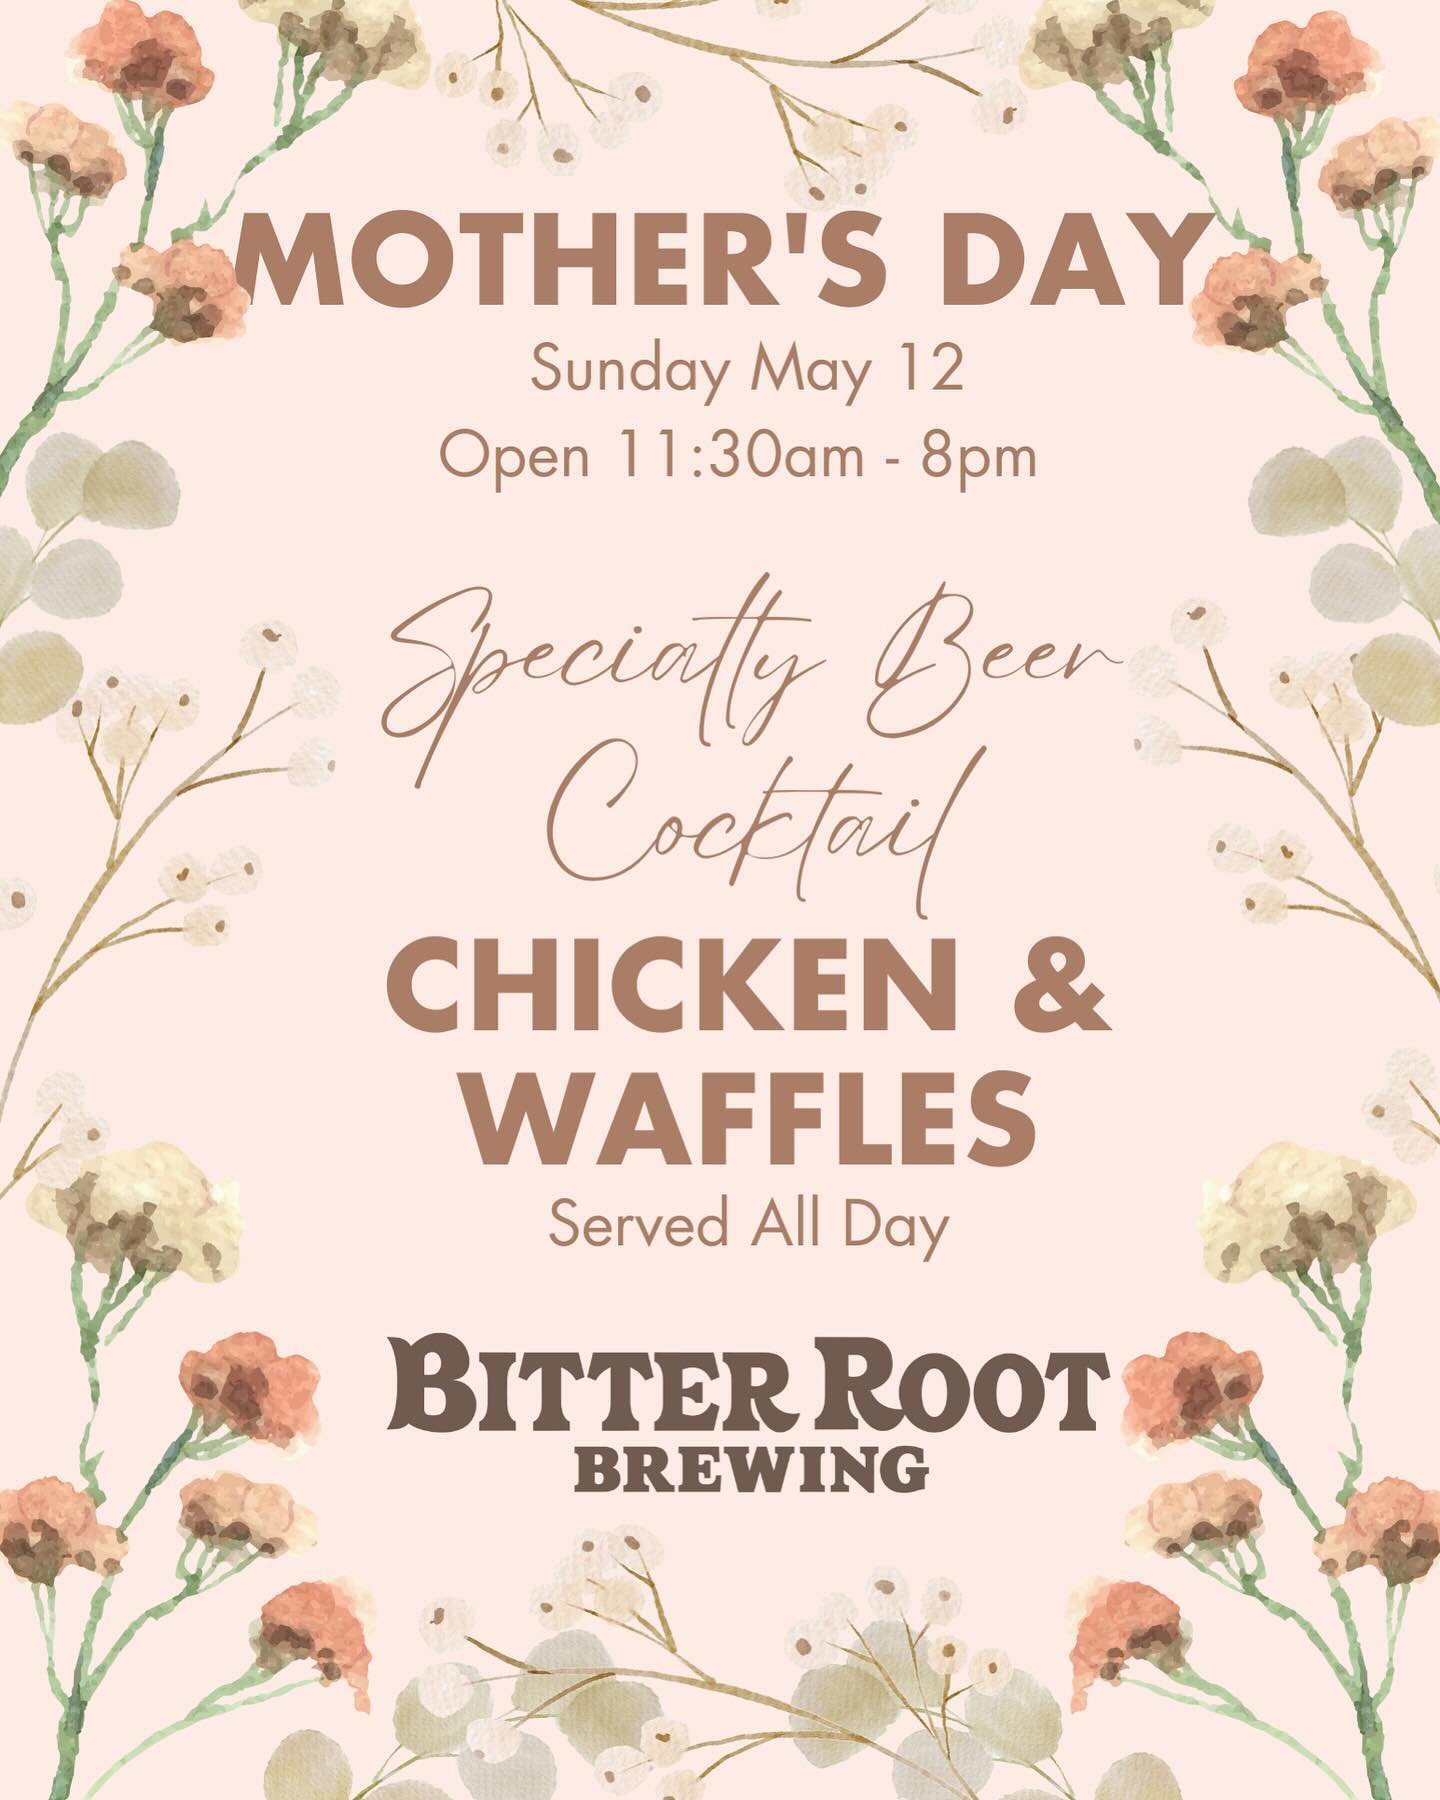 Treat your mother tomorrow down at the brewery! The chicken and waffles always a hit and we&rsquo;ve got beer cocktails  on top!
.
.
.
#loveyourmother #treatyourmother #thankyoumoms #supportlocal #supportyourmother #hamtownsfinest